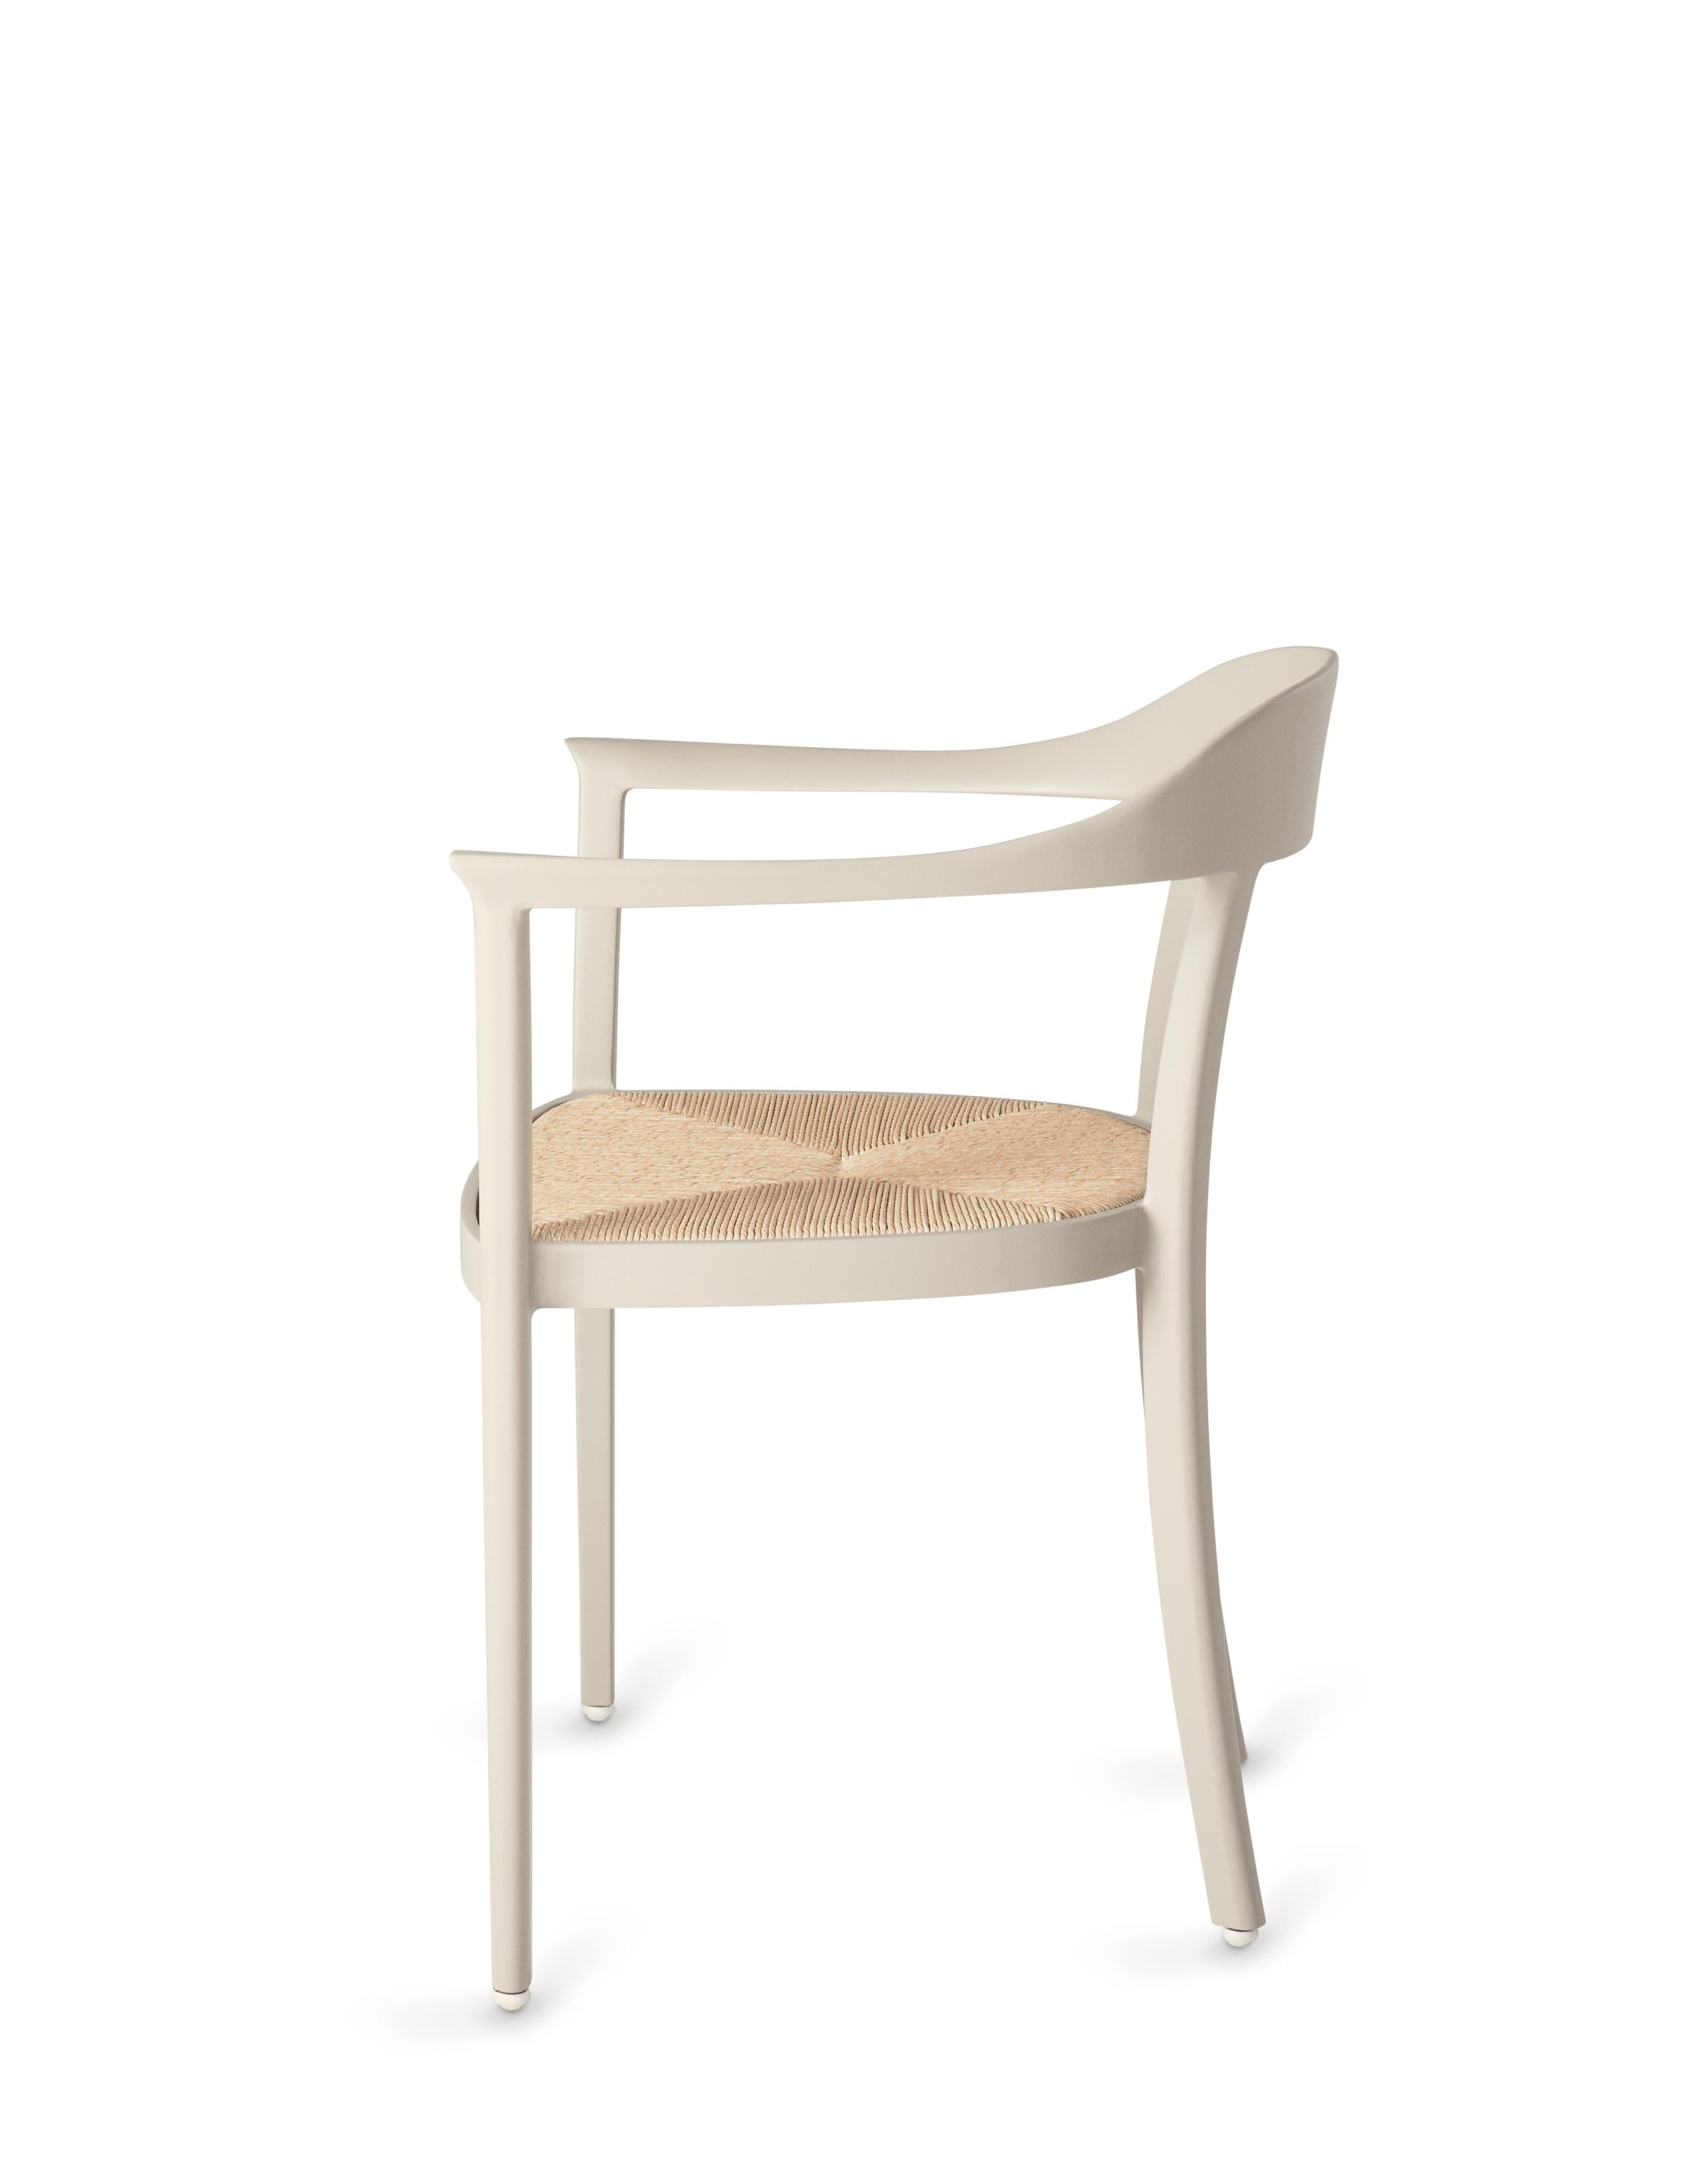 Chesapeake Dining Chair, Pale Grey, Neutral, Woven Rush Seat, Outdoor Garden 1